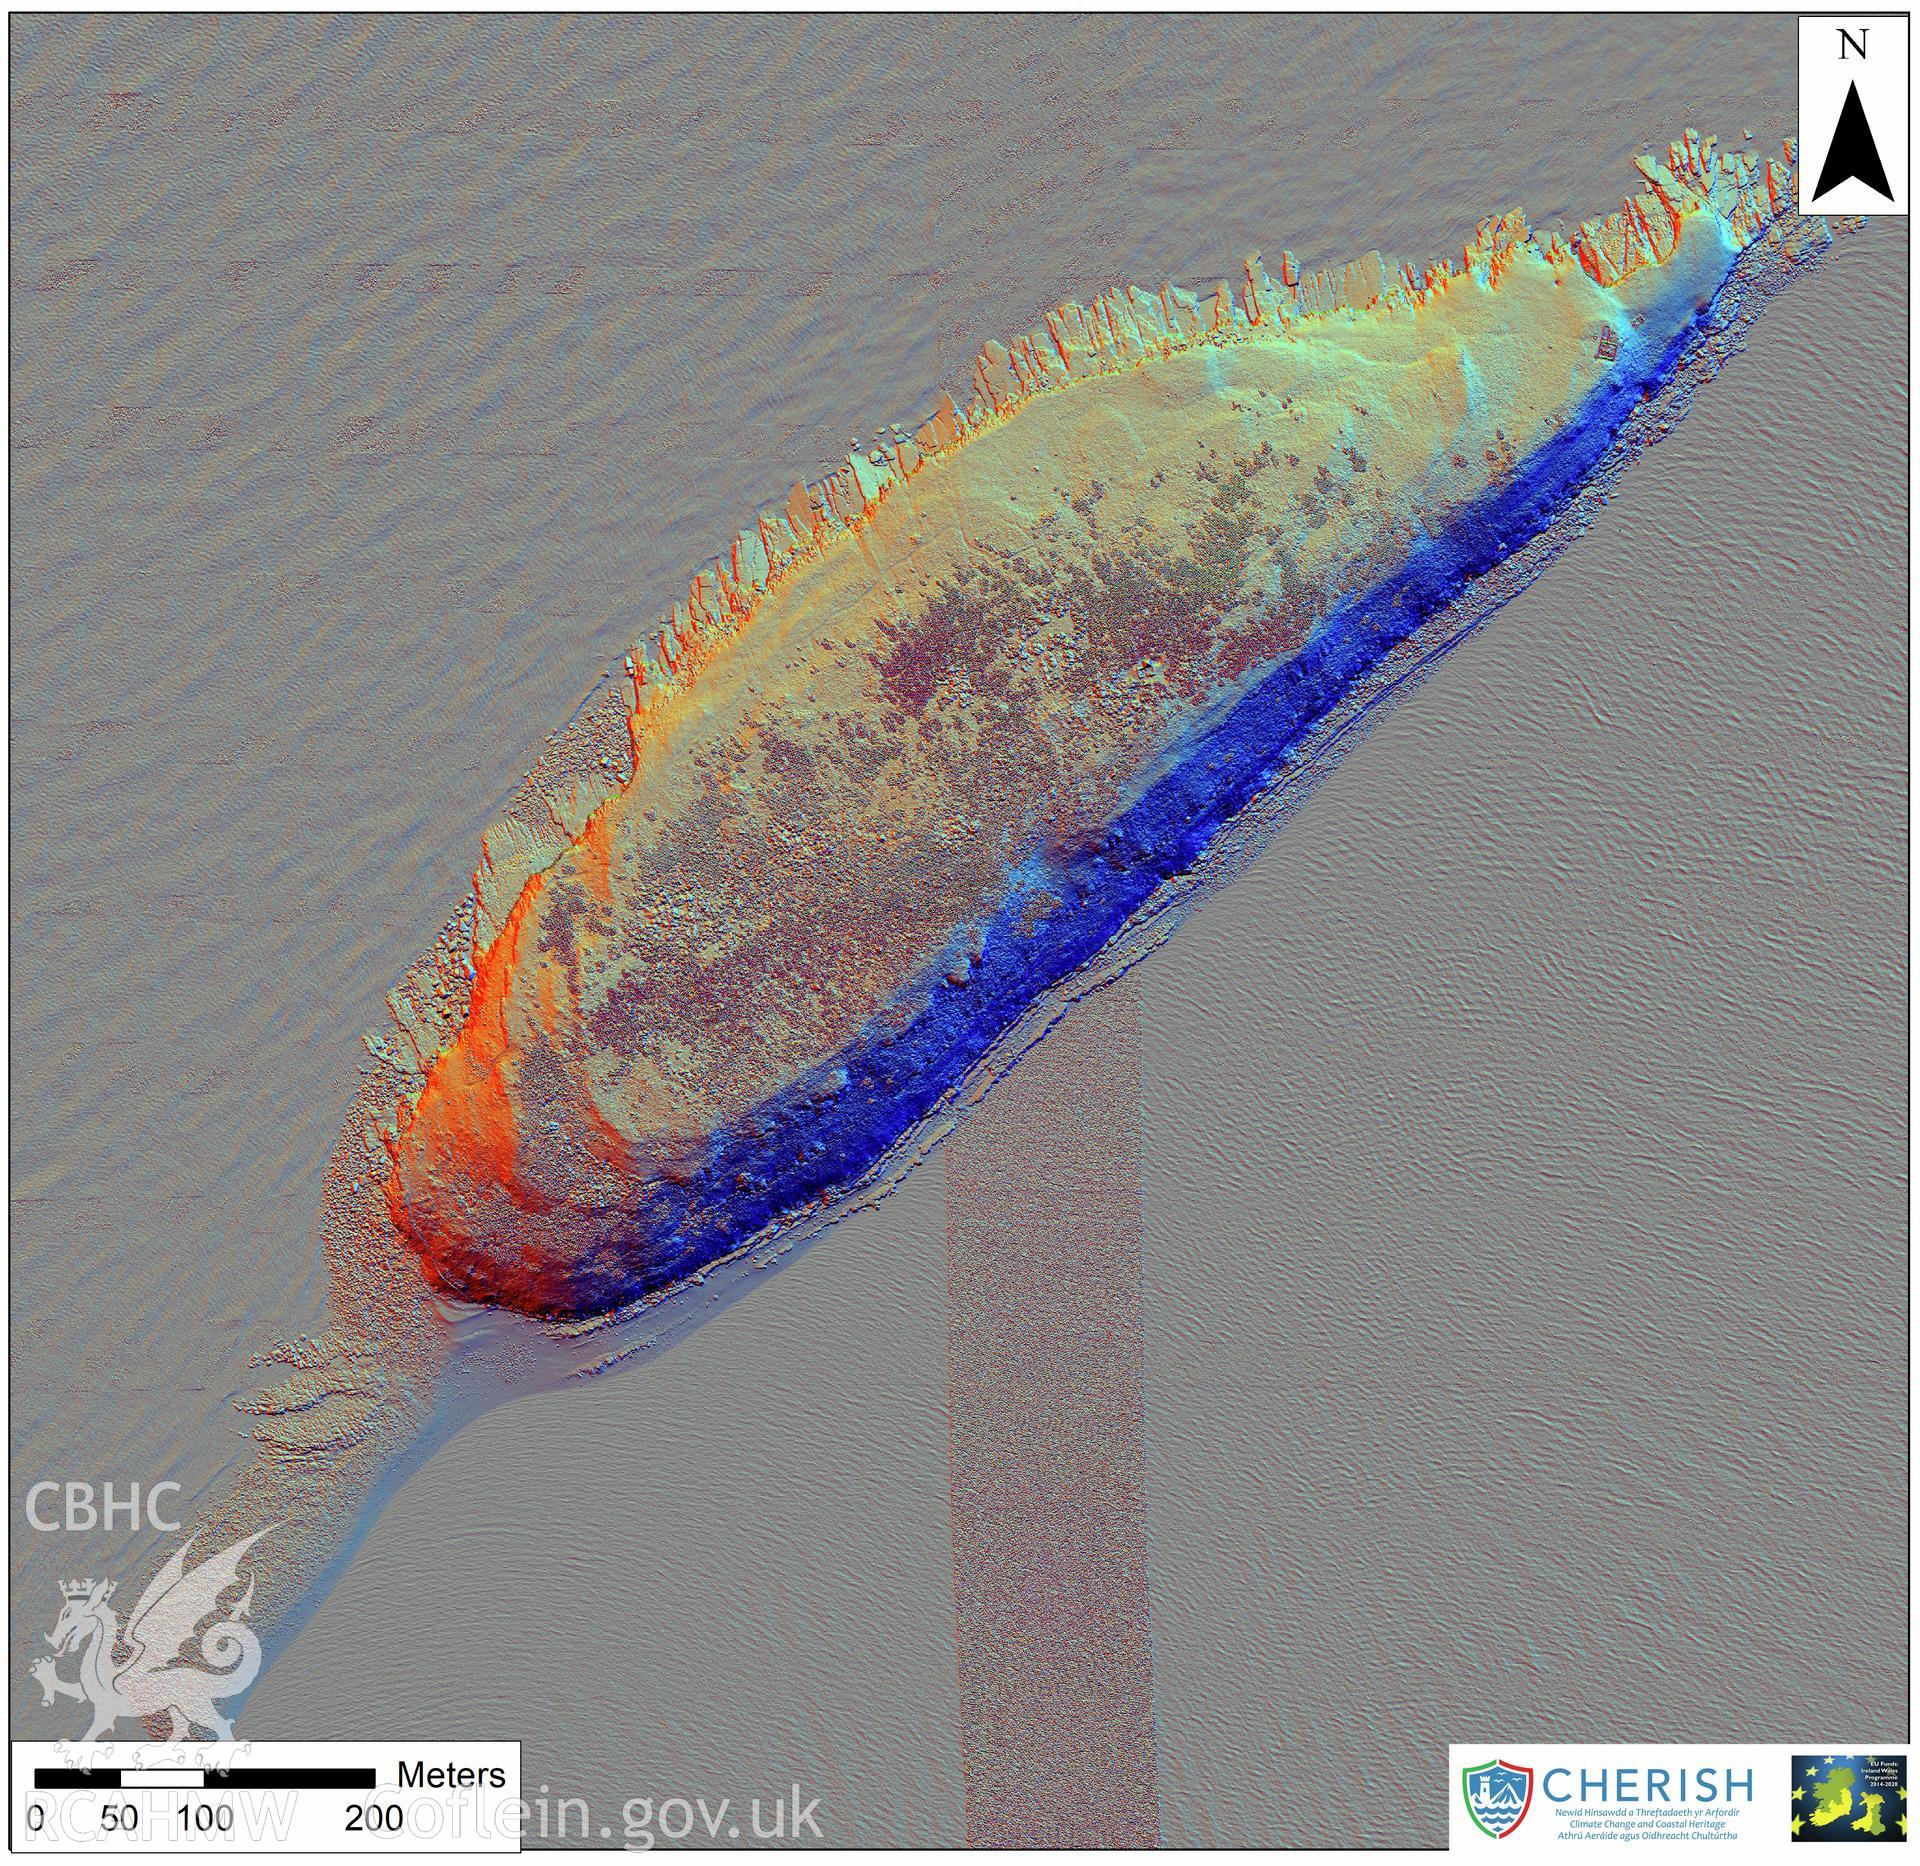 Ynys Seiriol (Puffin Island). Airborne laser scanning (LiDAR) commissioned by the CHERISH Project 2017-2021, flown by Bluesky International LTD at low tide on 24th February 2017. Digital Surface Model (DSM) showing whole of the island with multi hill shading.